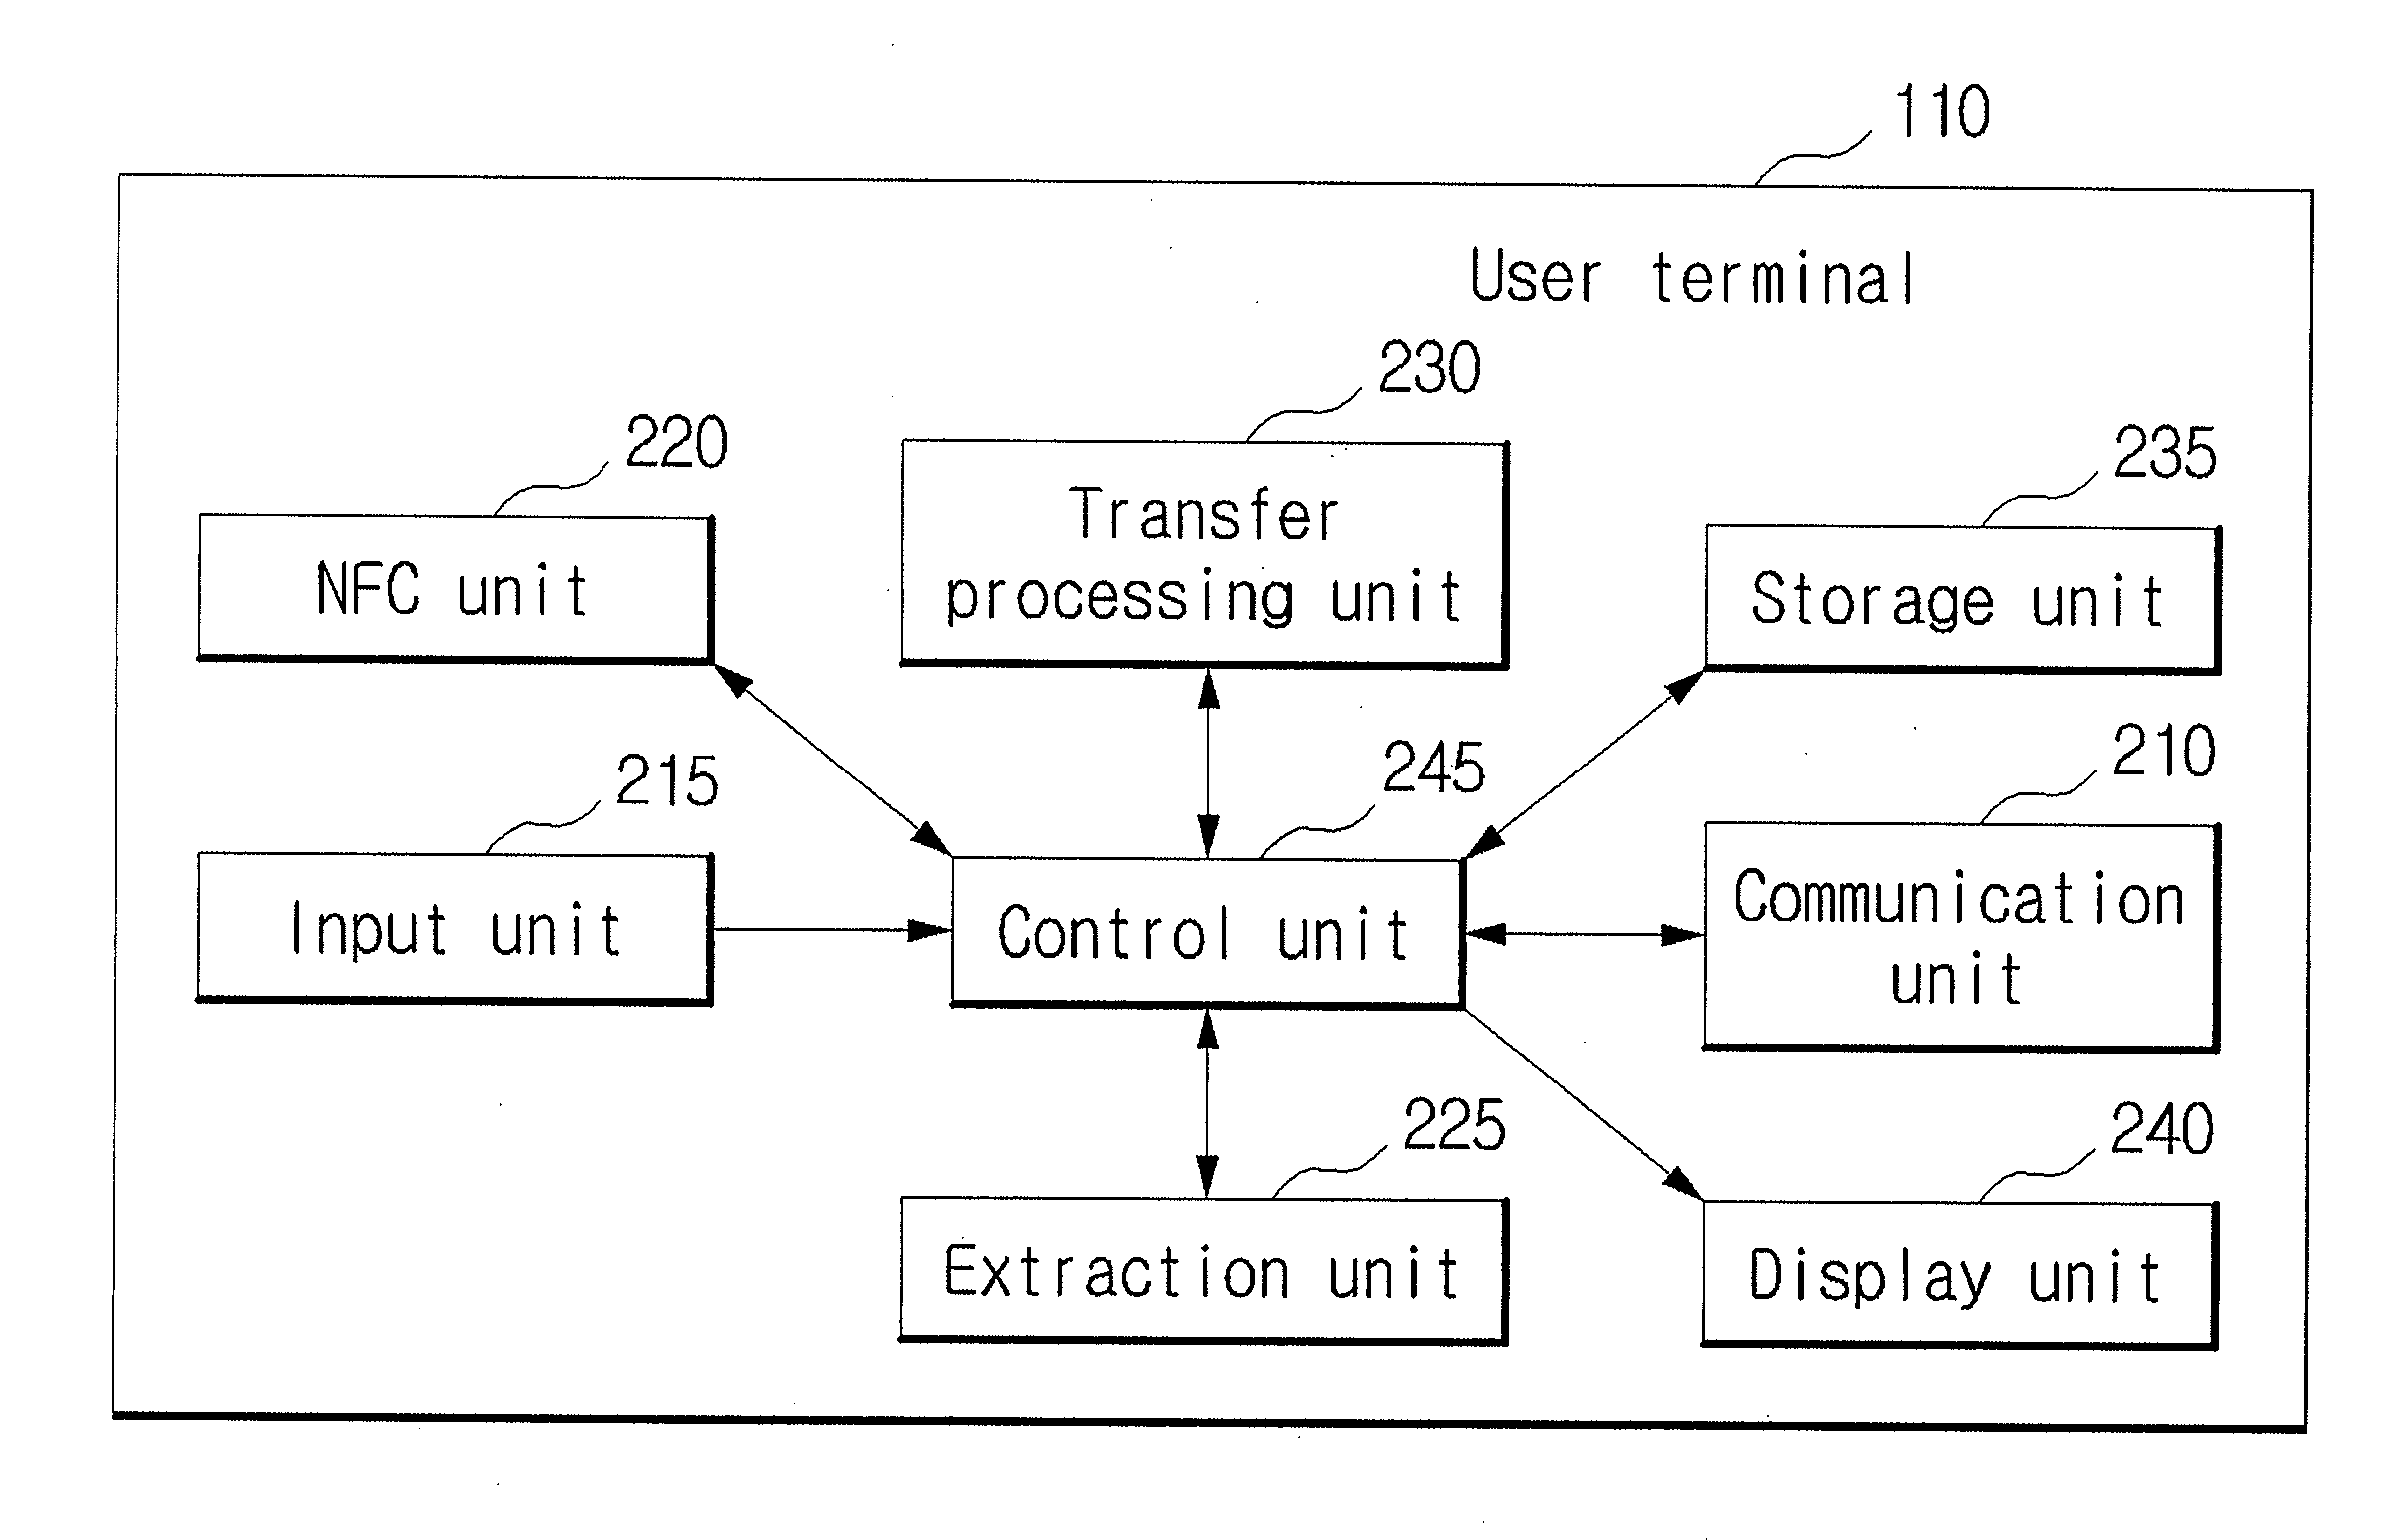 Method and system for providing financial service